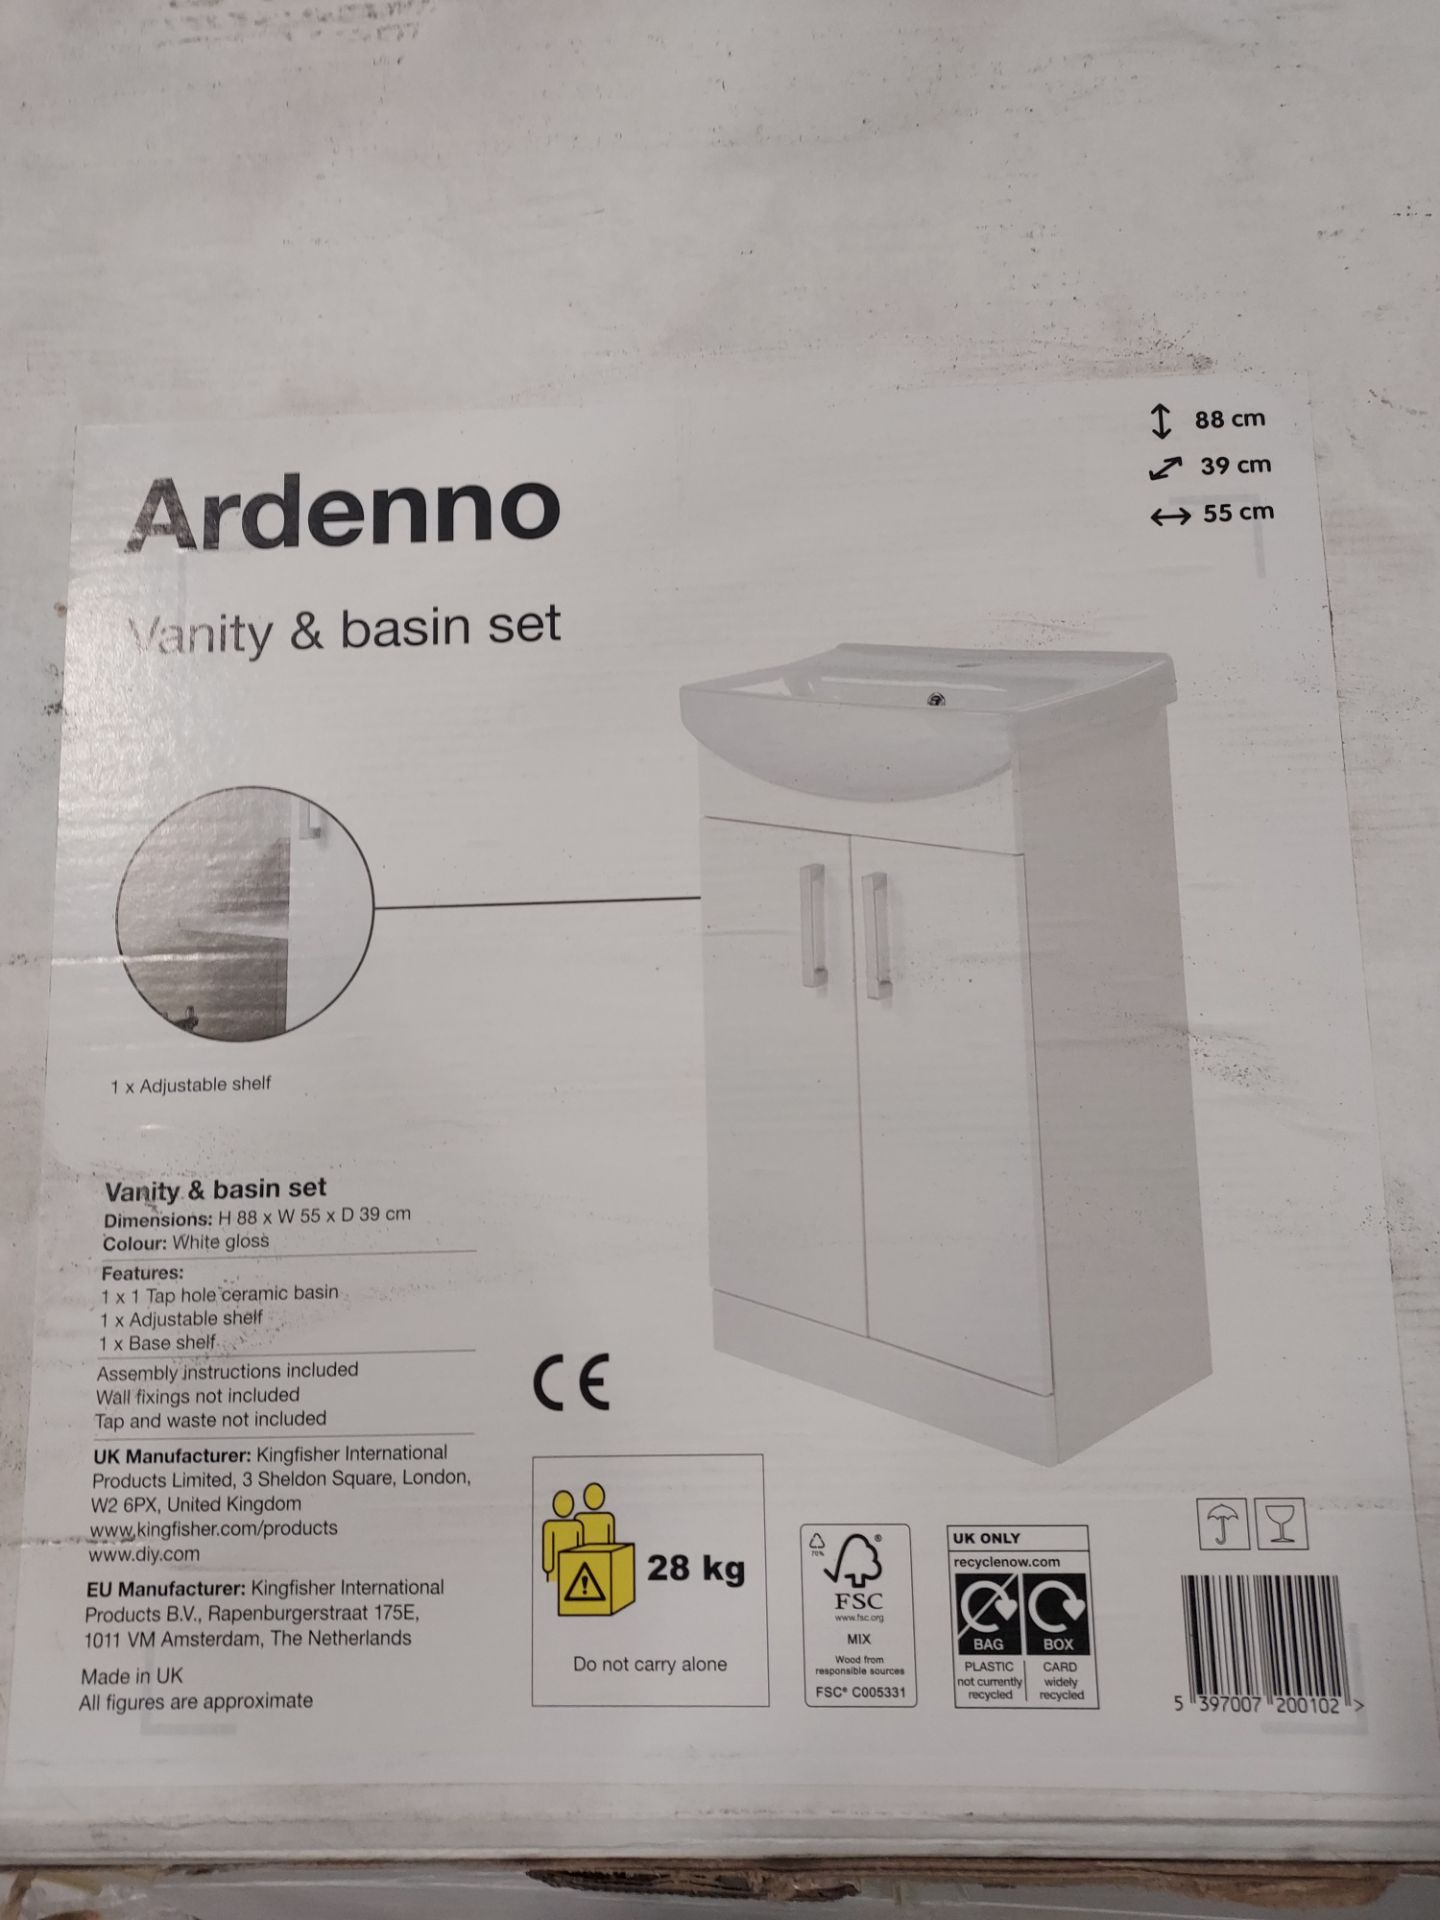 10 X BRAND NEW ARDENNO VANITY AND BASIN SET IN GLOSS WHITE - 88X39X55CM - BQFTP0654 - PLEASE NOTE - Image 2 of 2